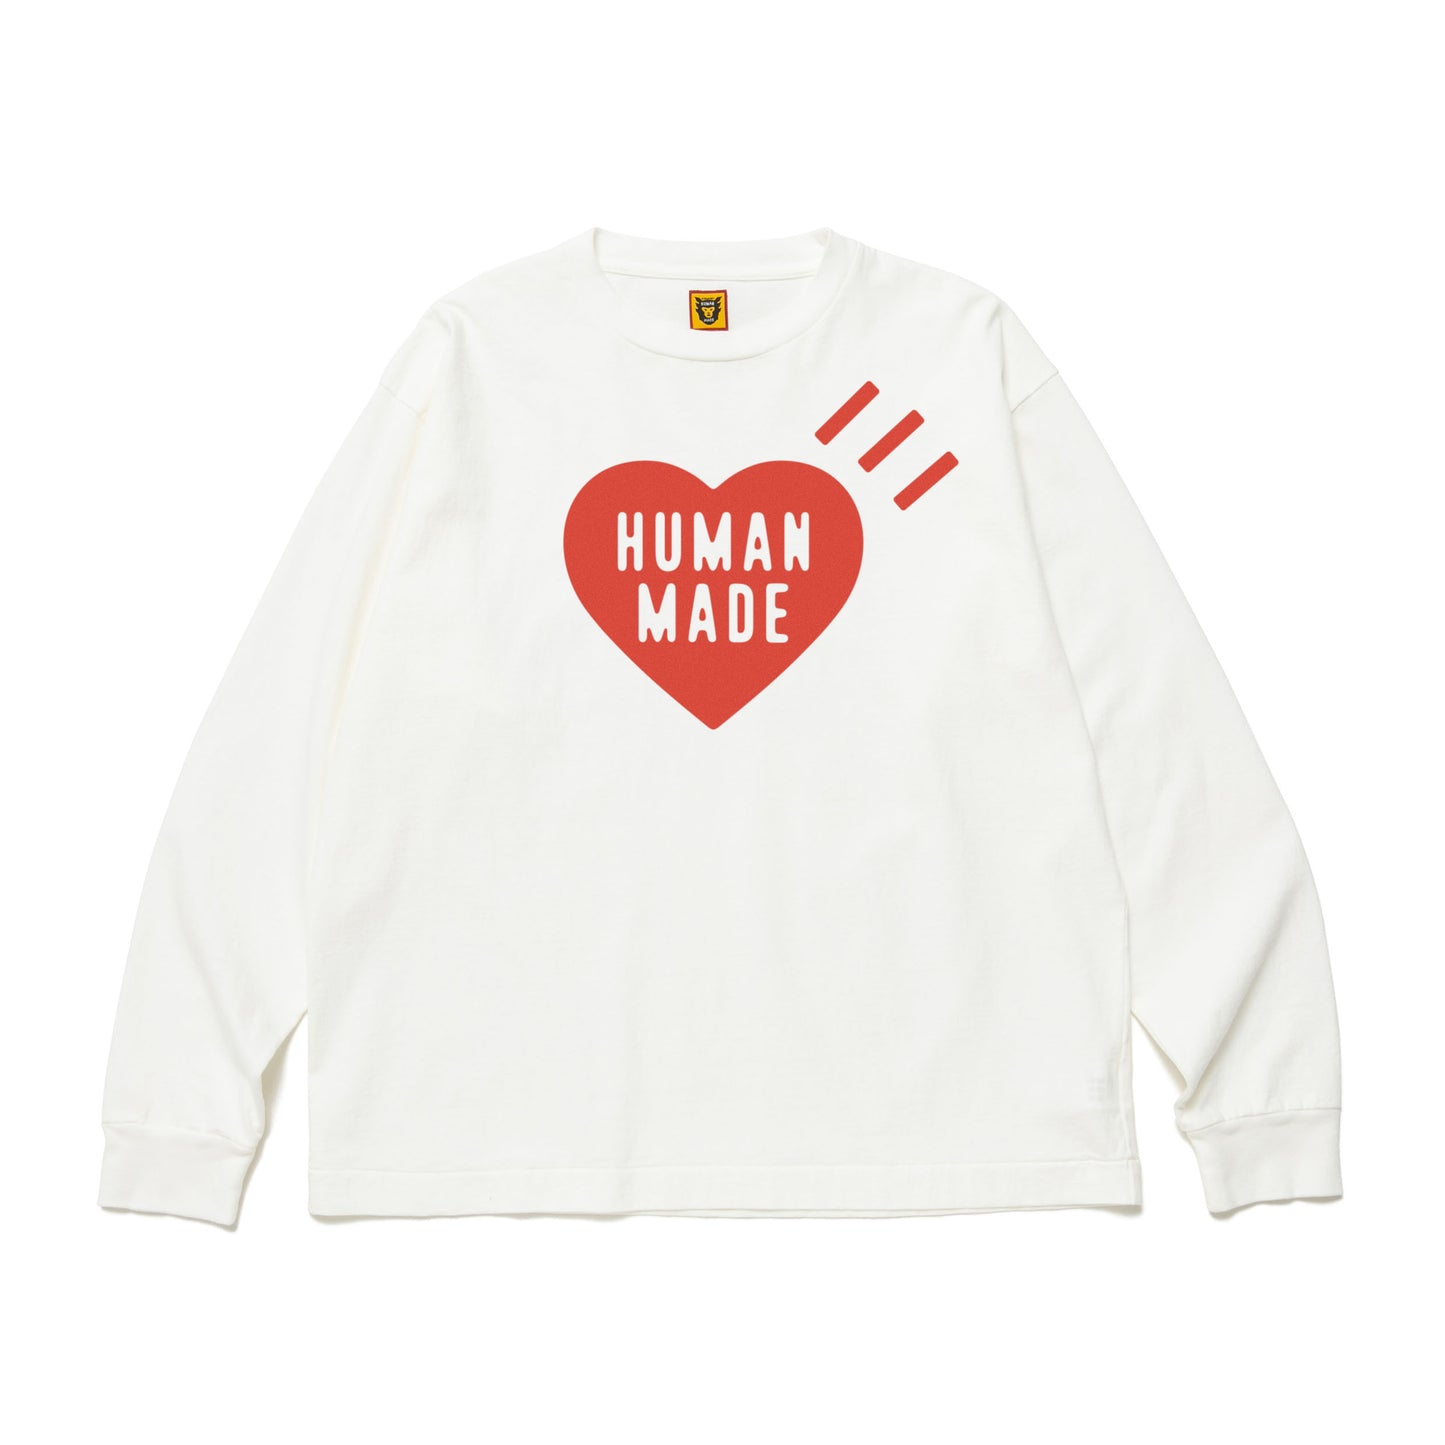 DAILY L/S T-SHIRT #261129 – HUMAN MADE ONLINE STORE